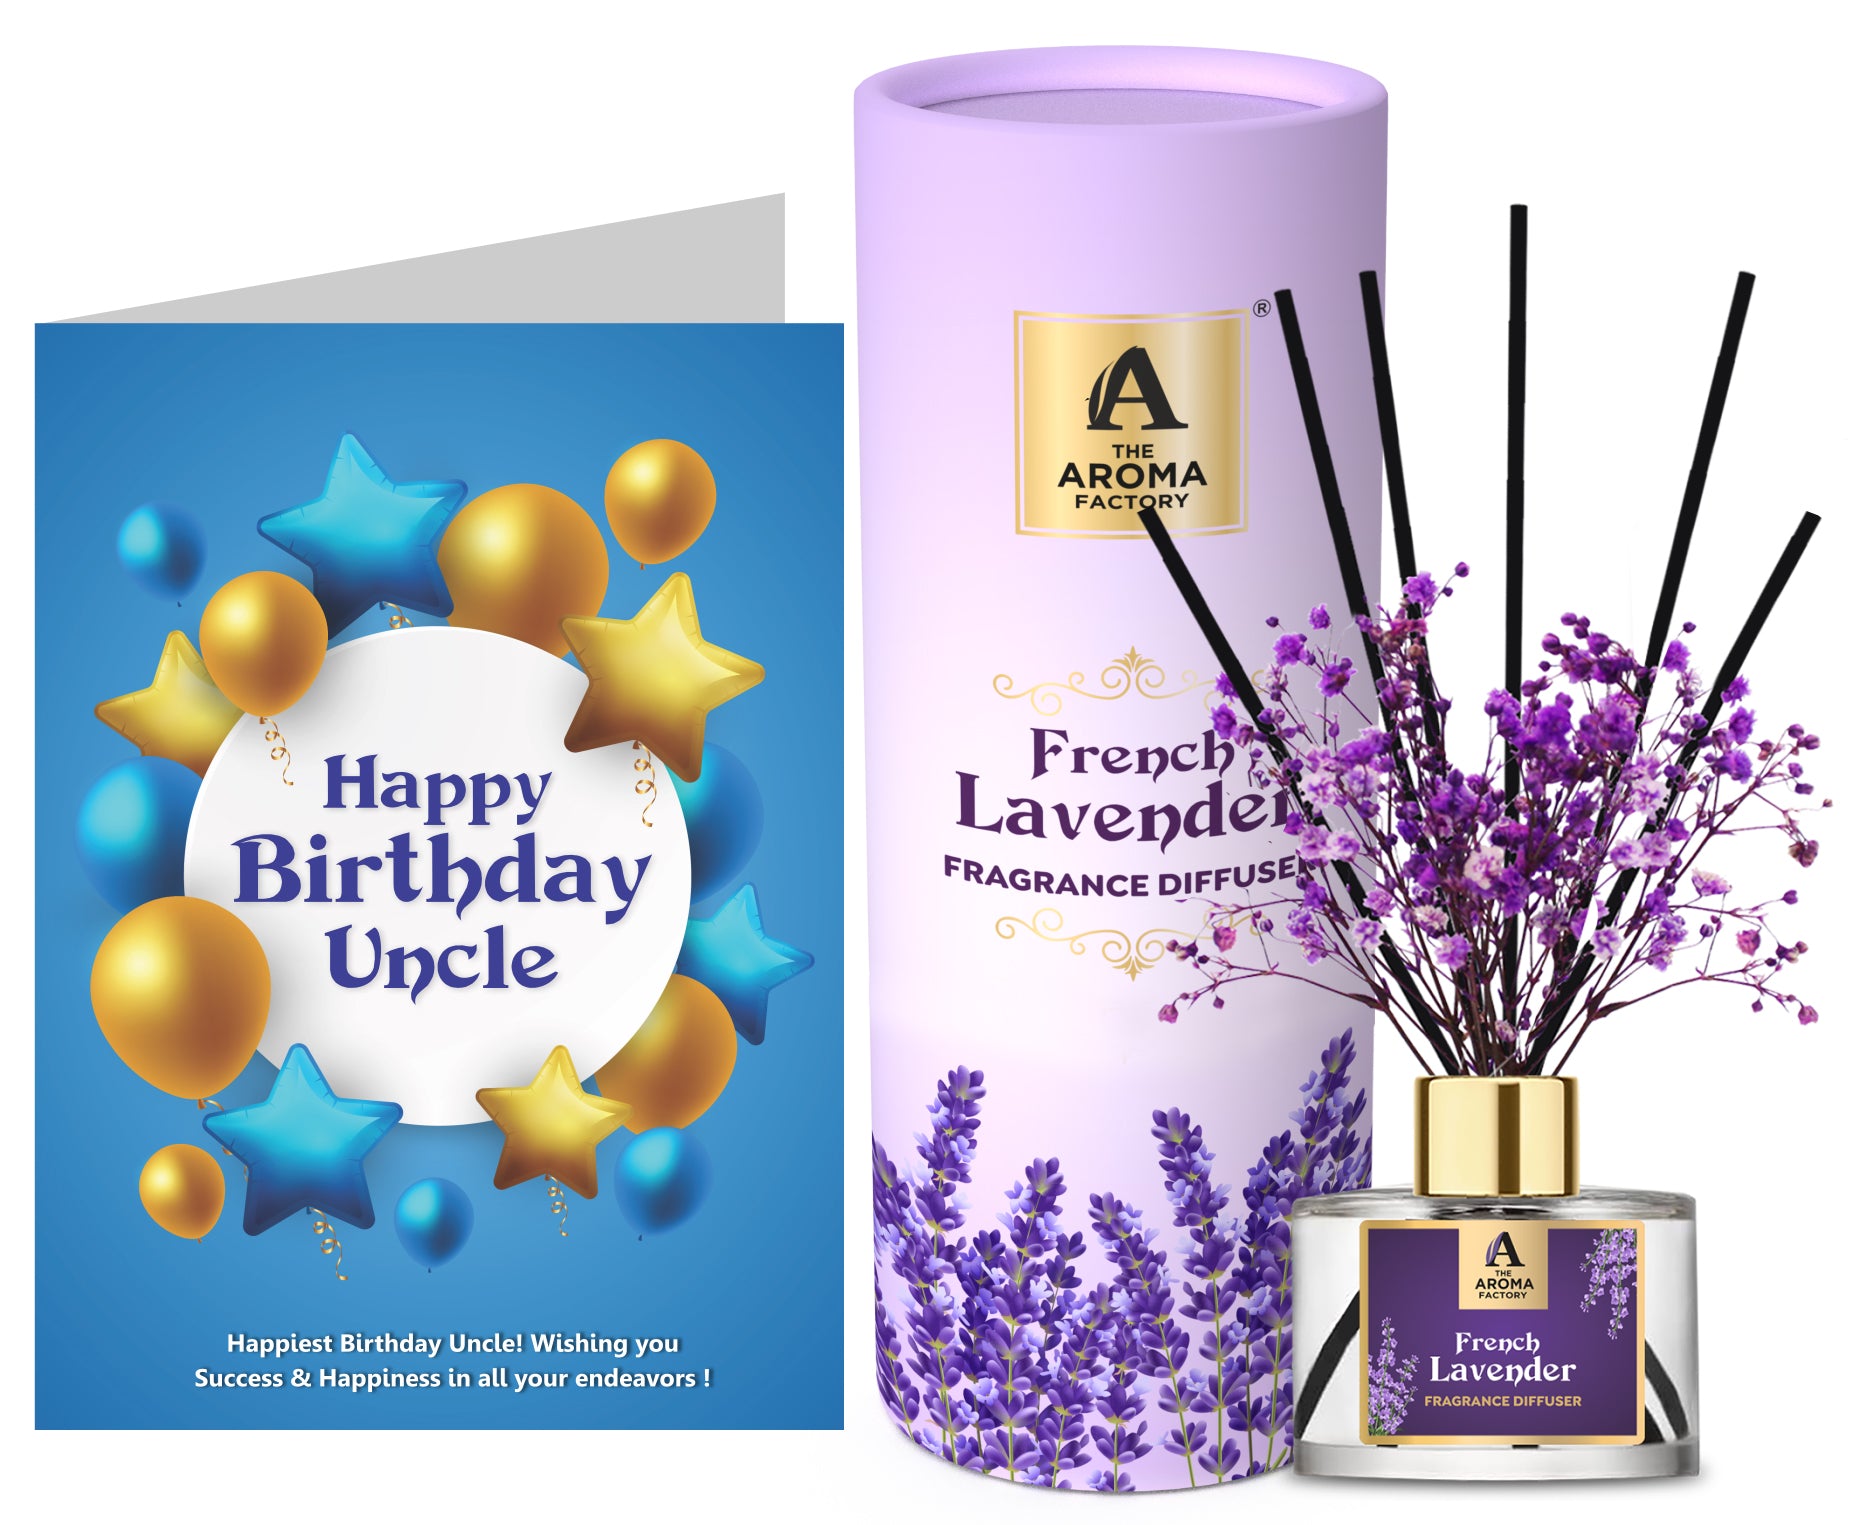 The Aroma Factory Happy Birthday Uncle Gift with Card, French Lavender Fragrance Reed Diffuser Set (1 Box + 1 Card)